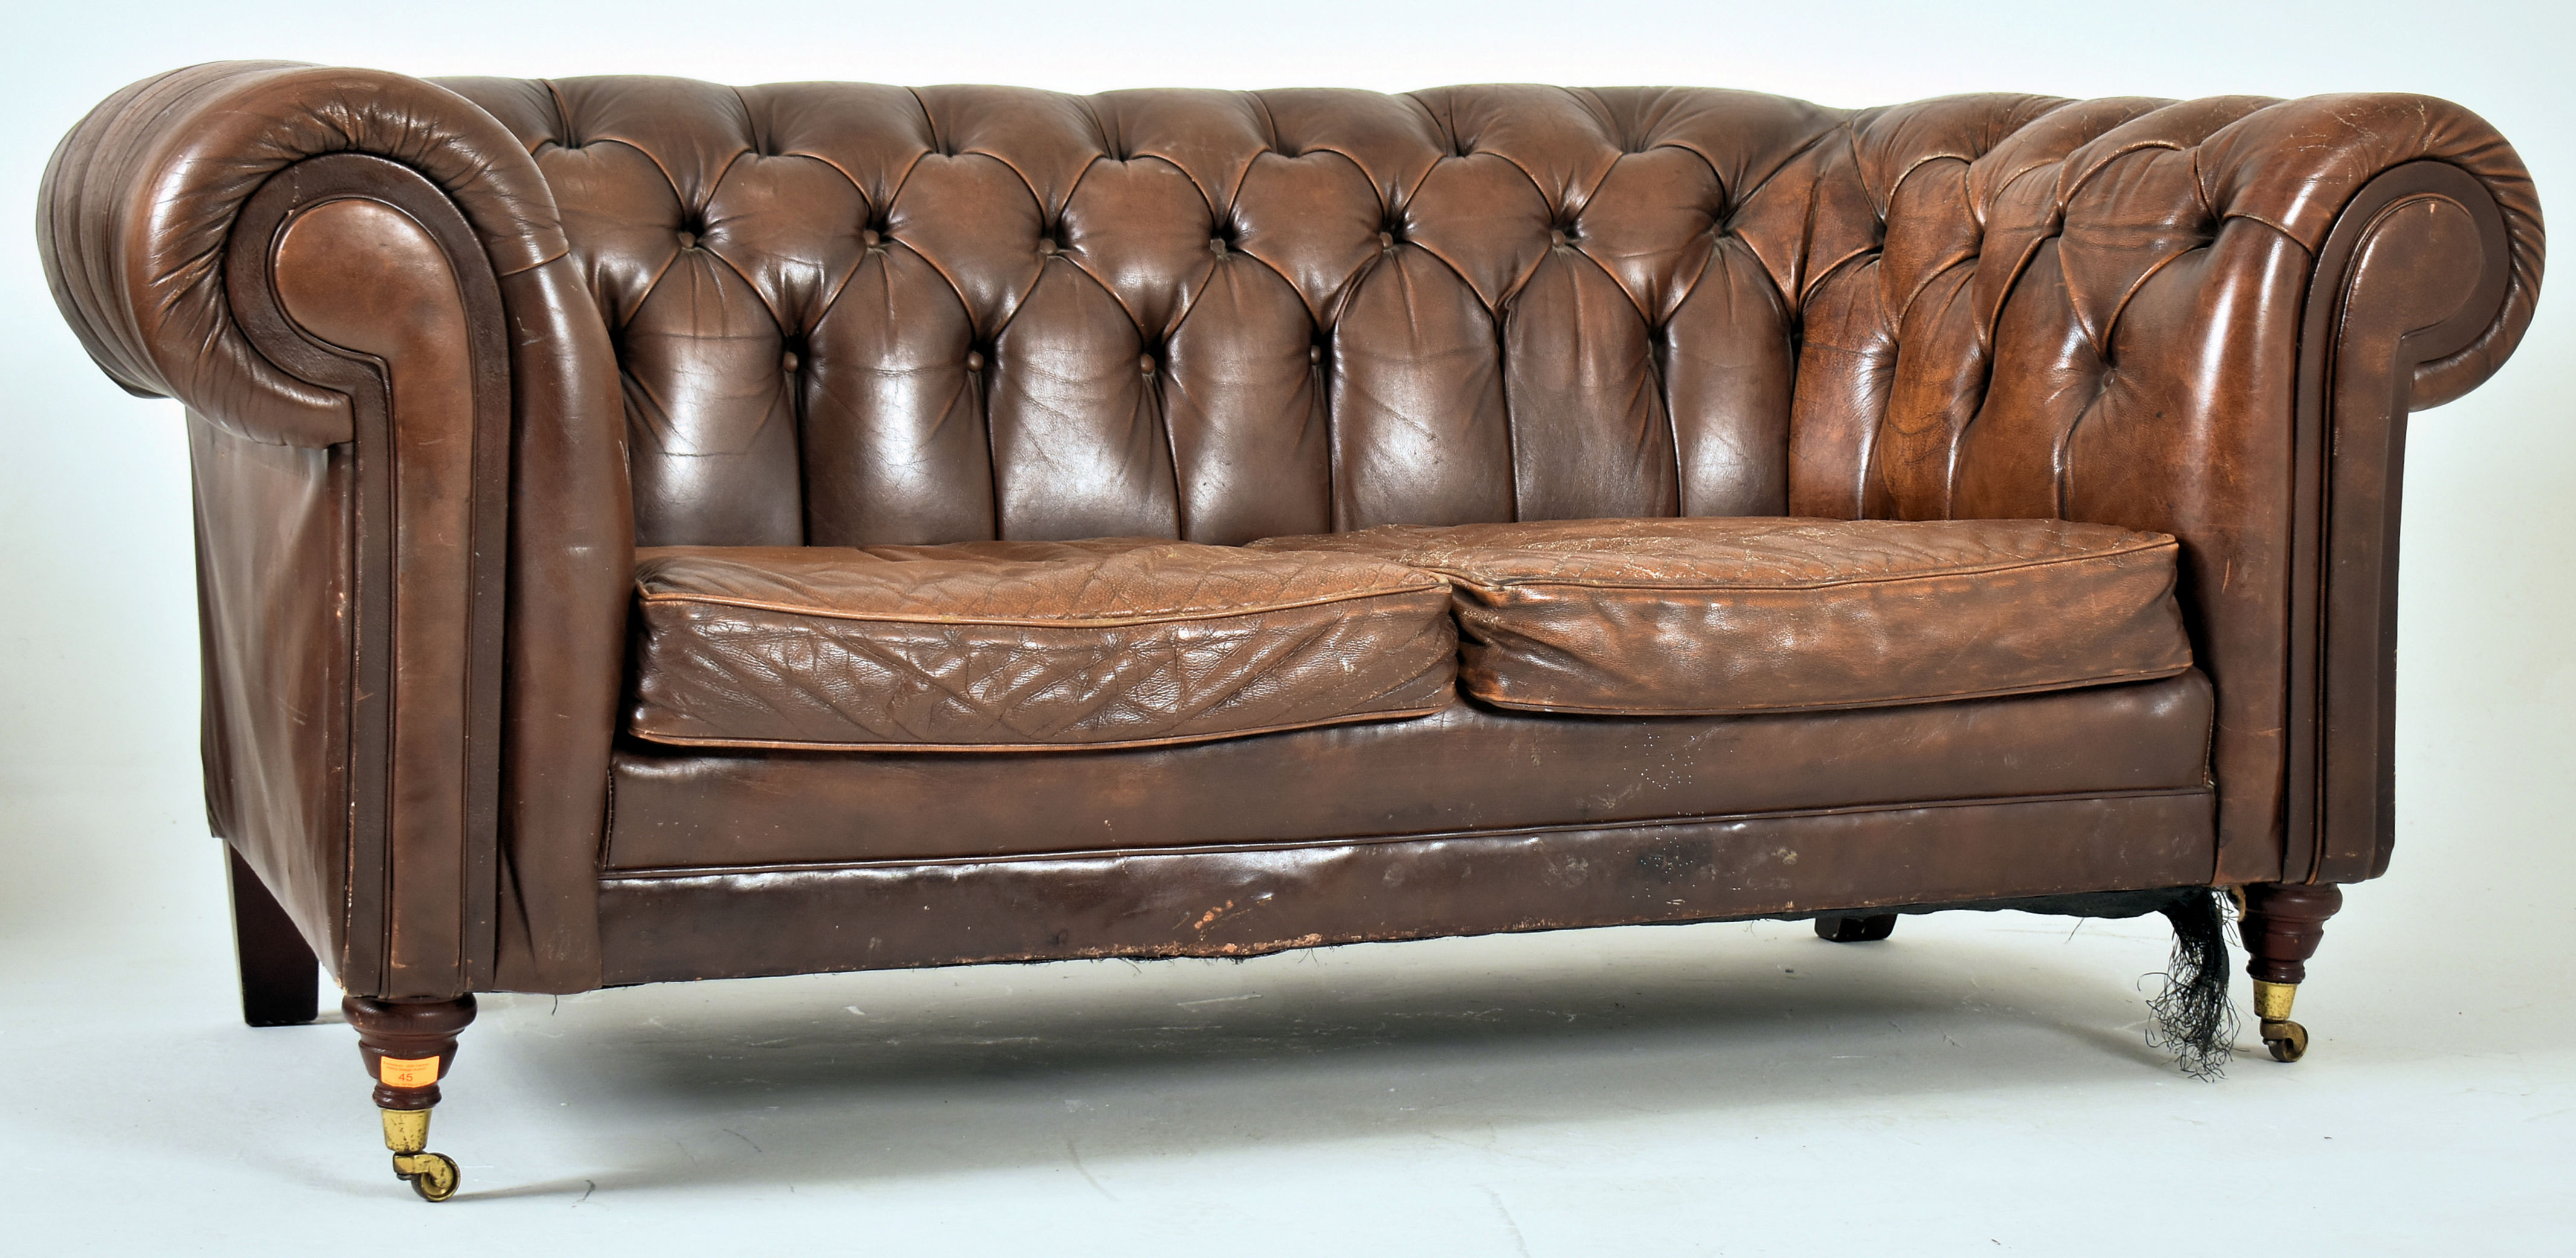 CONTEMPORARY BROWN LEATHER CHESTERFIELD SOFA